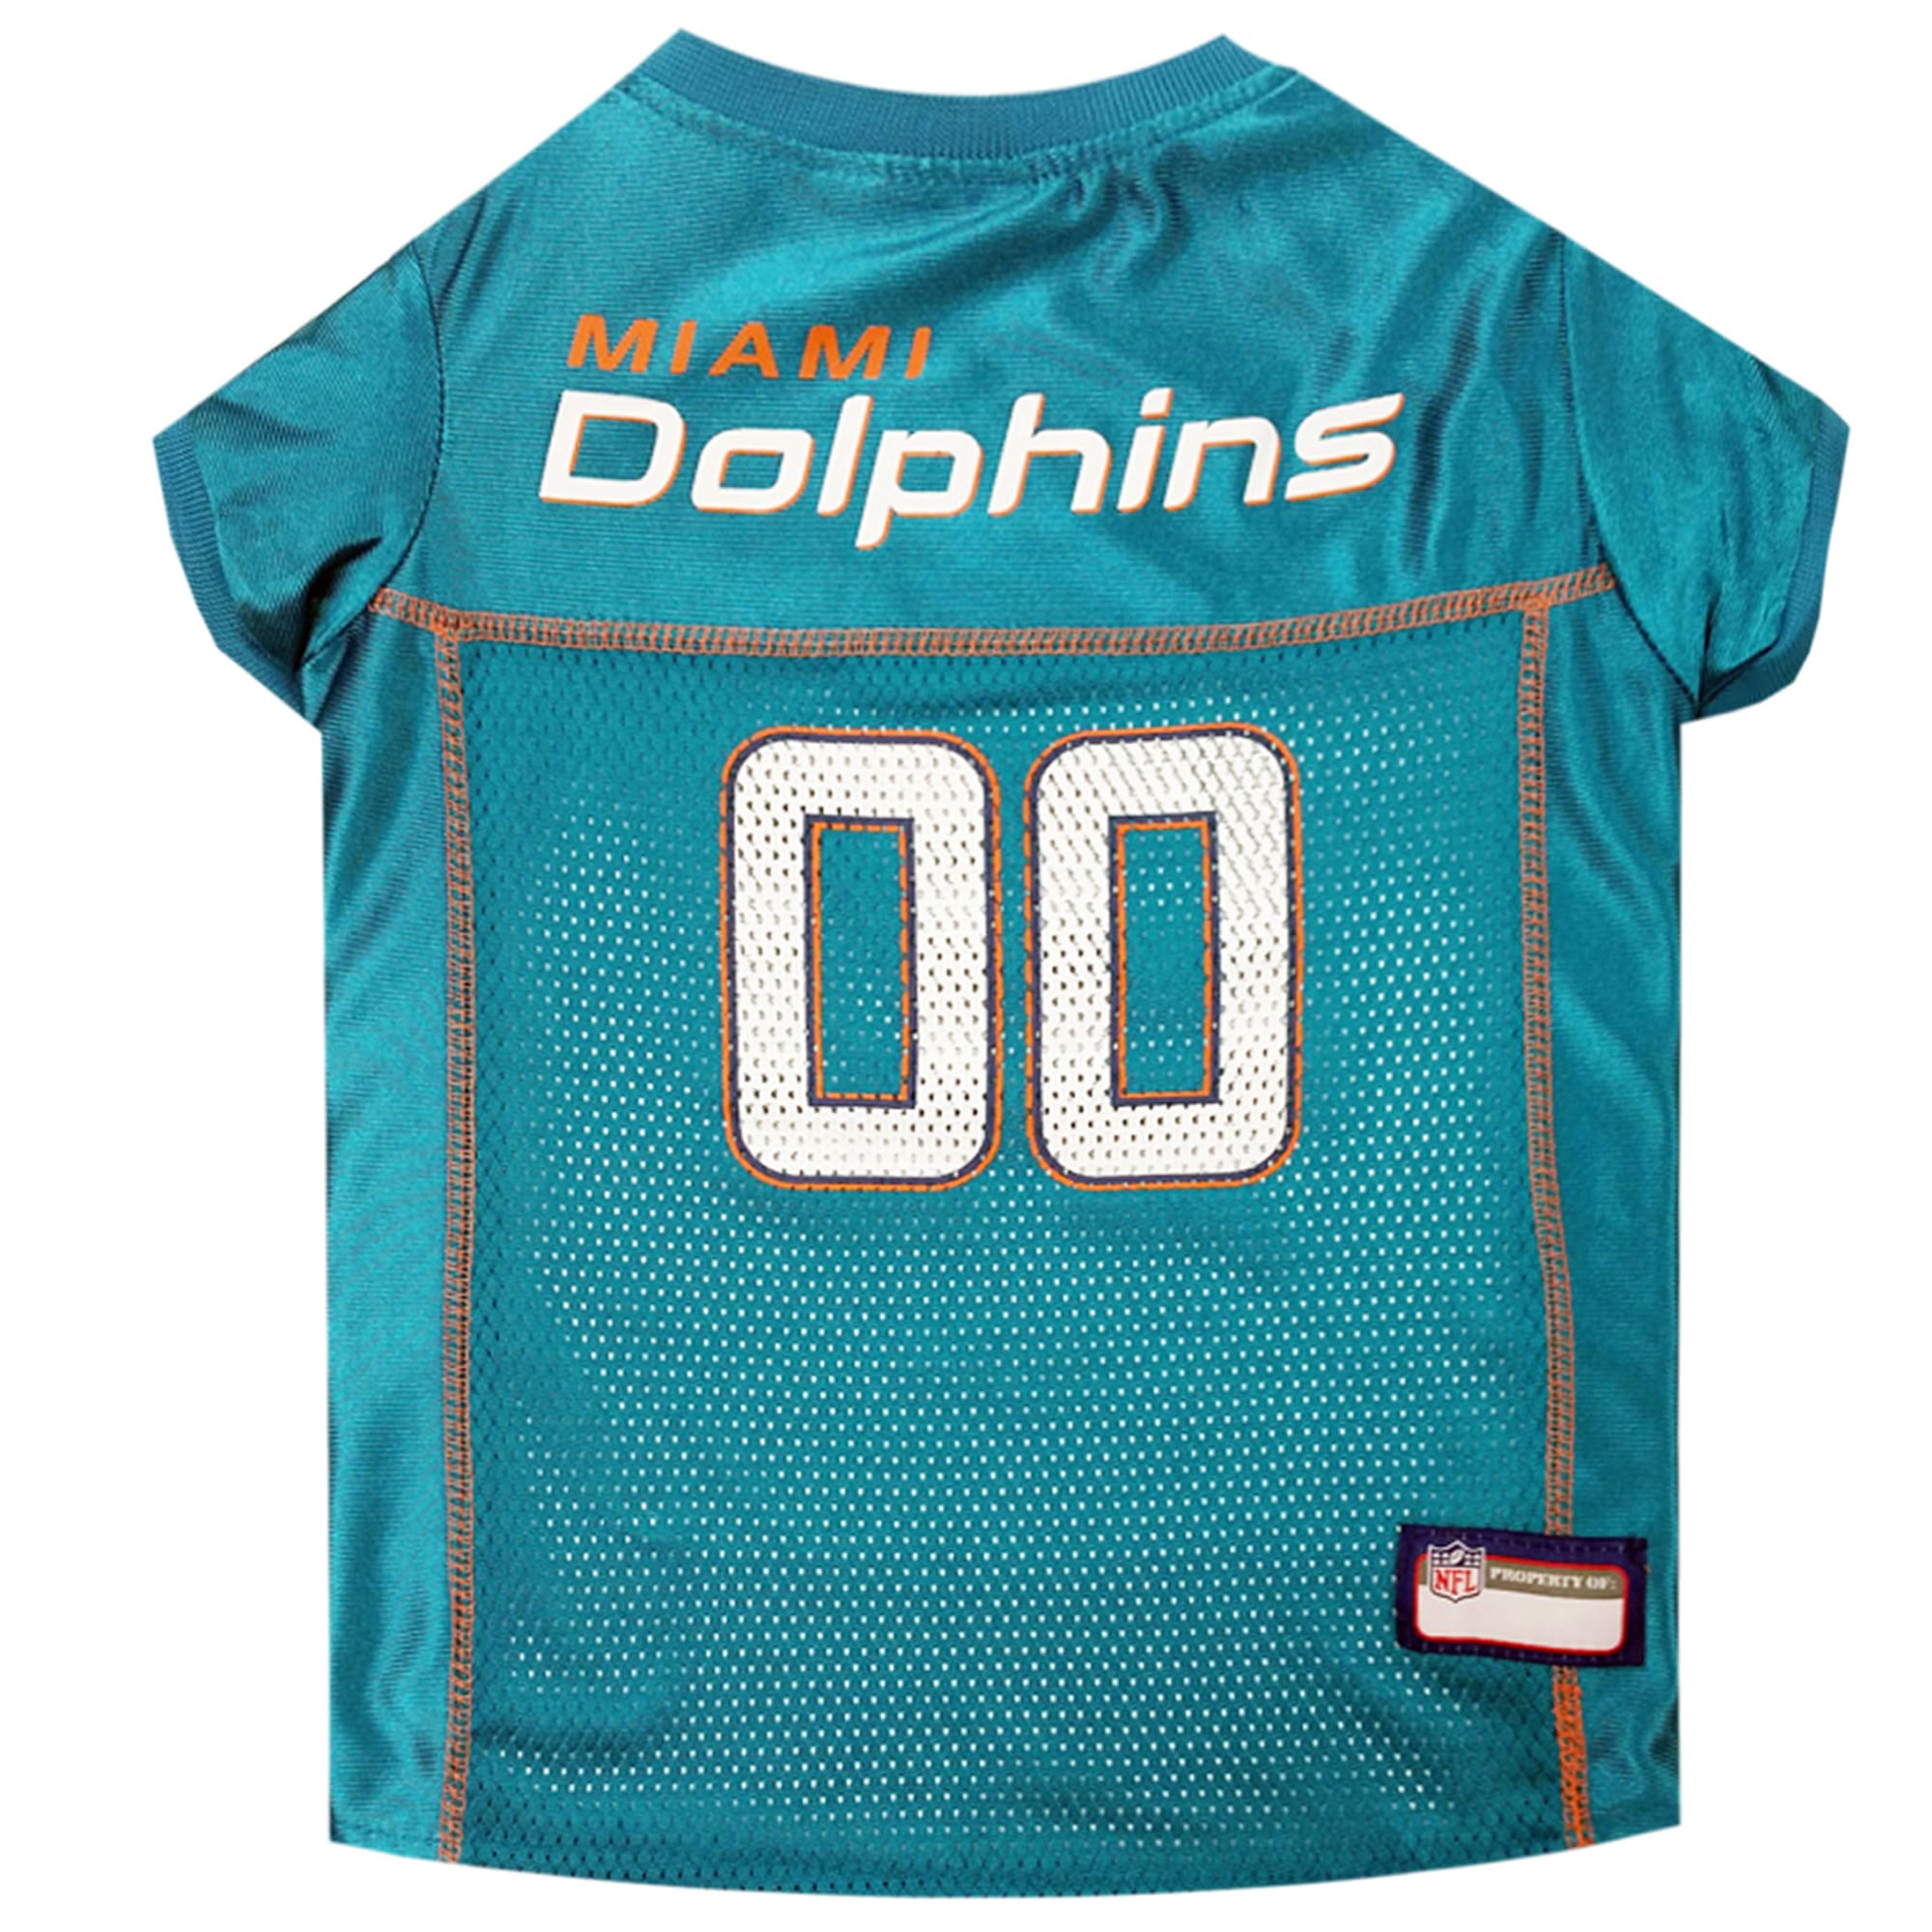 jersey miami dolphins